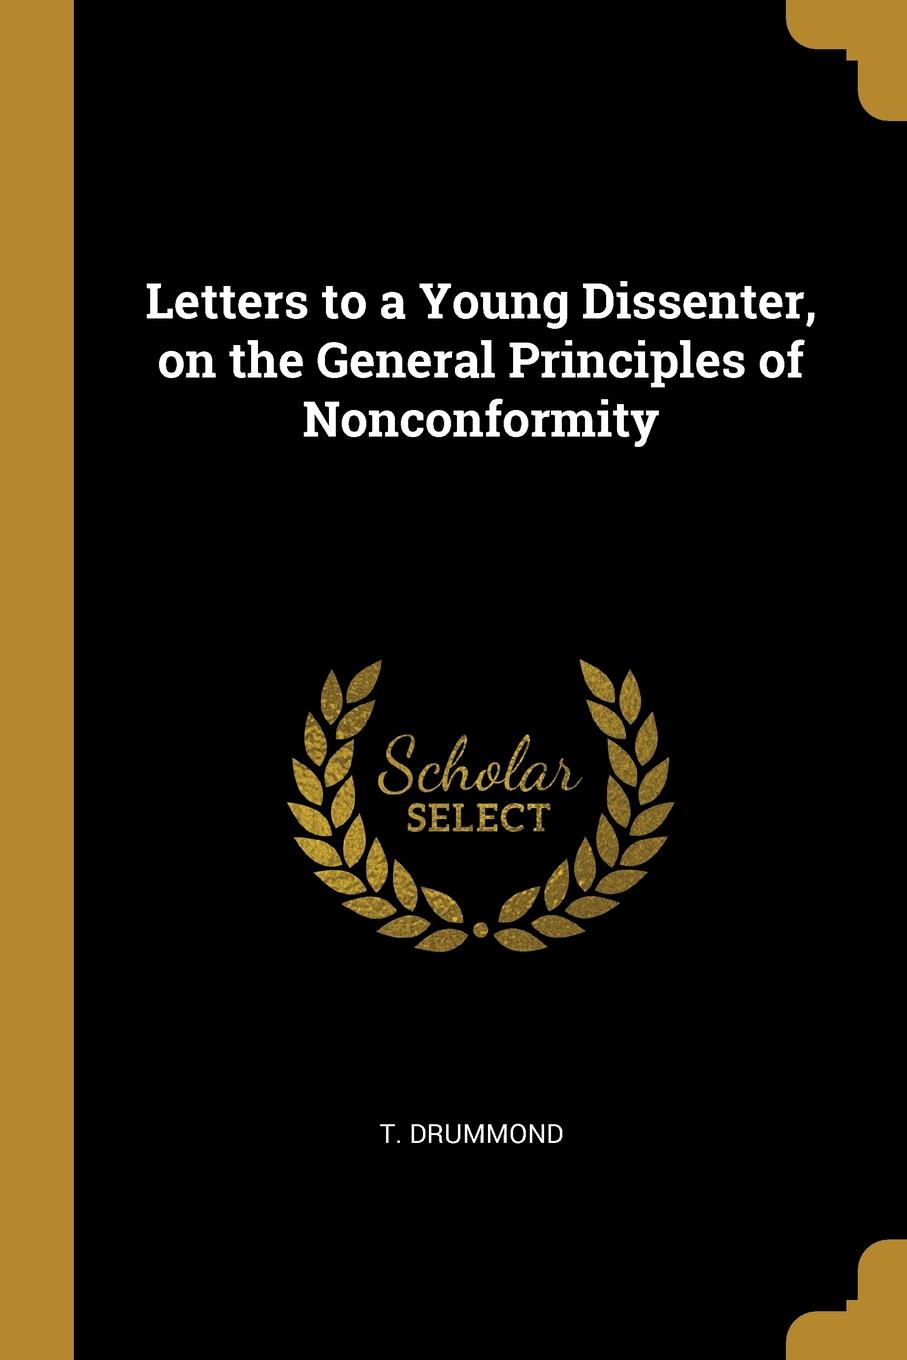 Letters to a Young Dissenter, on the General Principles of Nonconformity